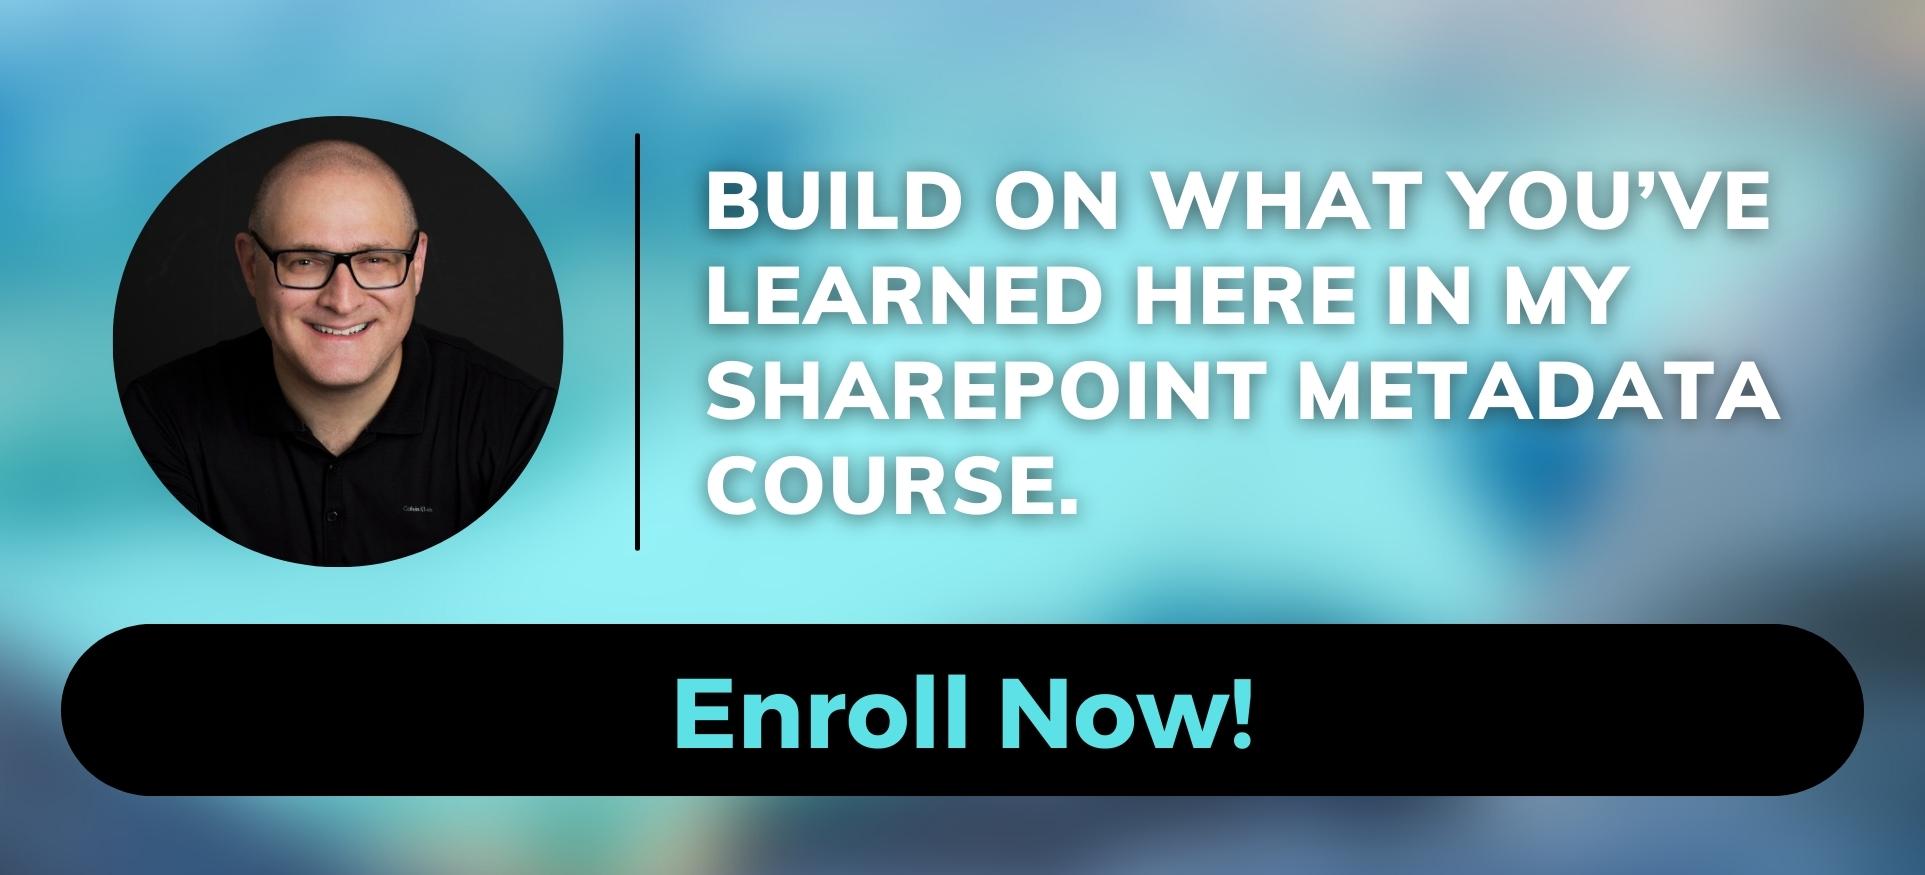 10 Build On What Youve Learned Here In My SharePoint Metadata Course. Enroll Now